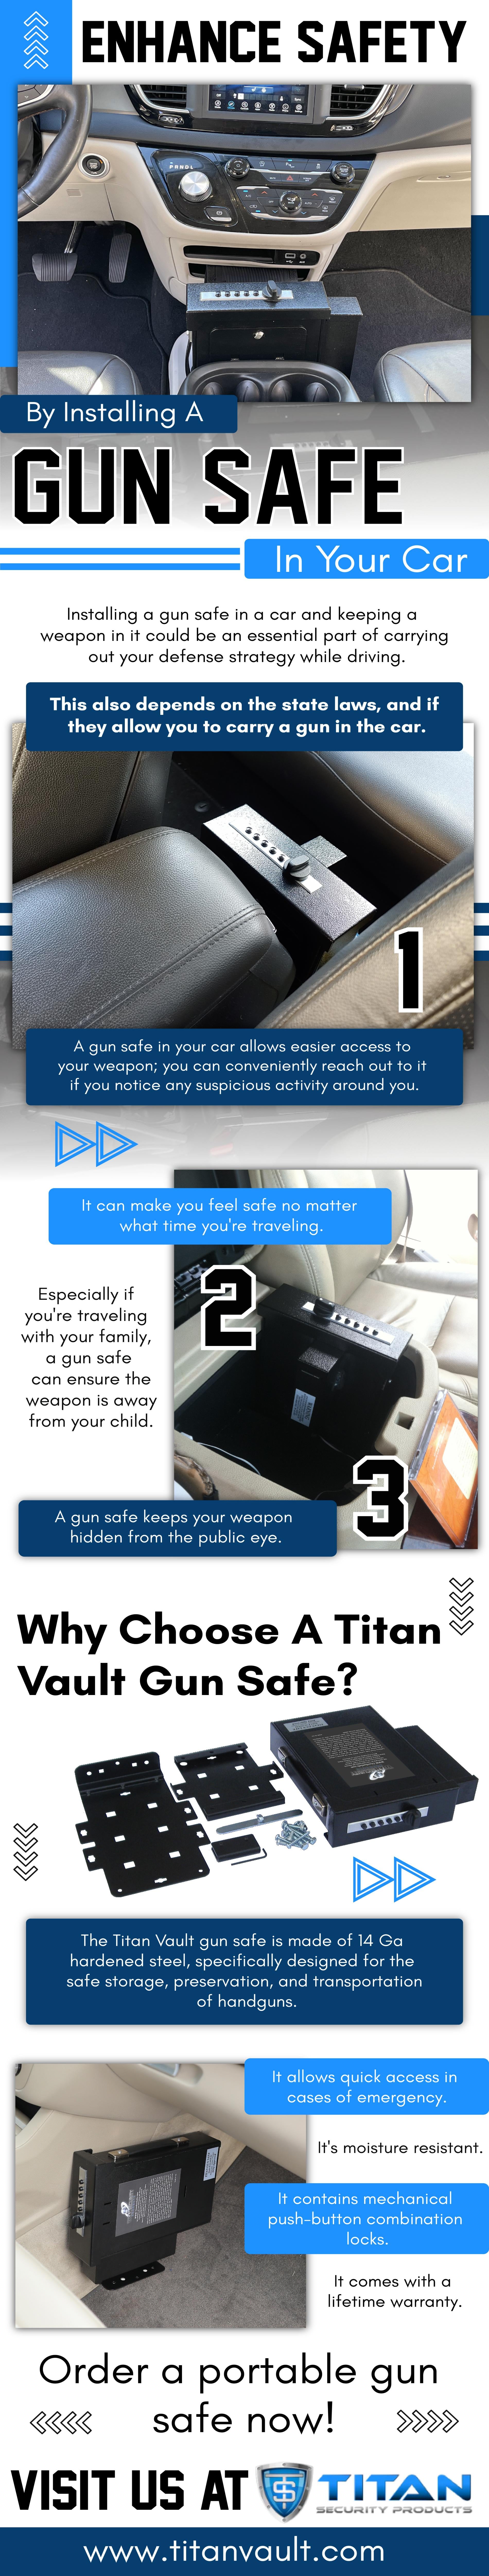 Enhance Safety by Installing A Gun Safe in your Car